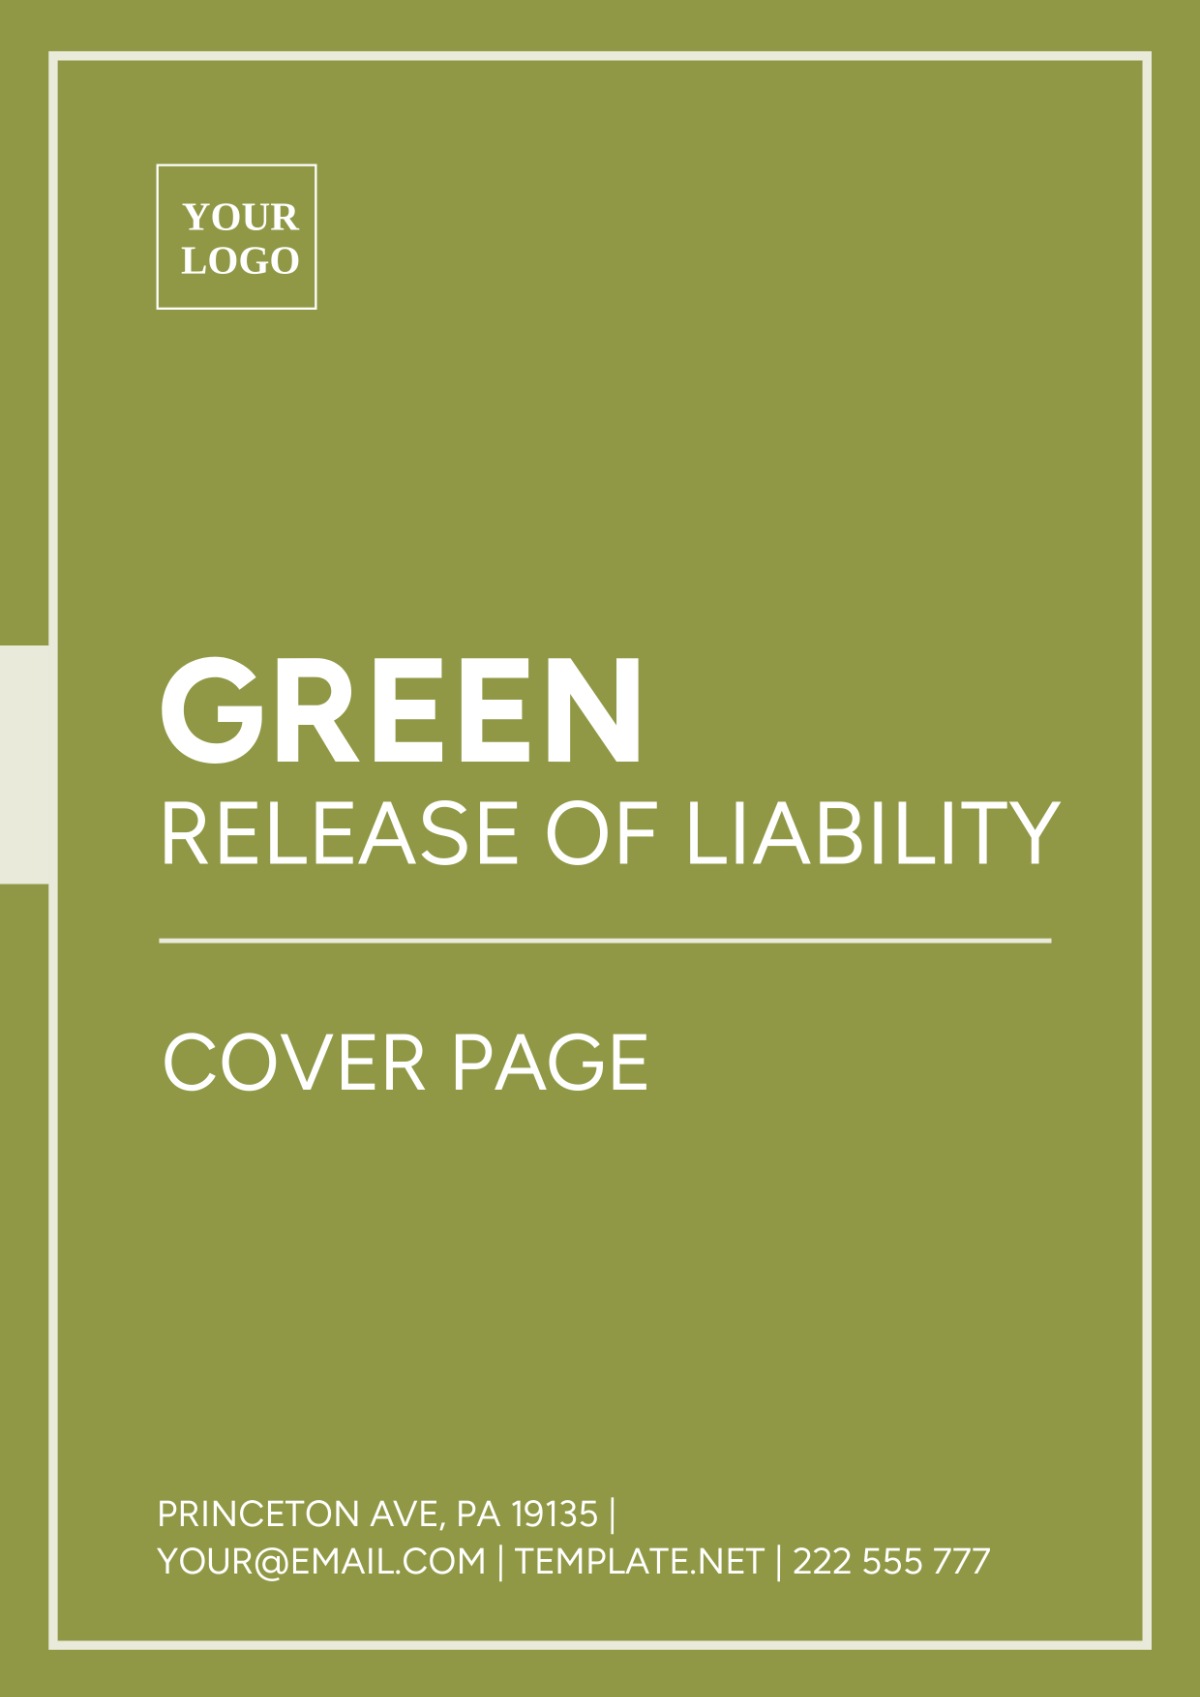 Green Release of Liability Cover Page